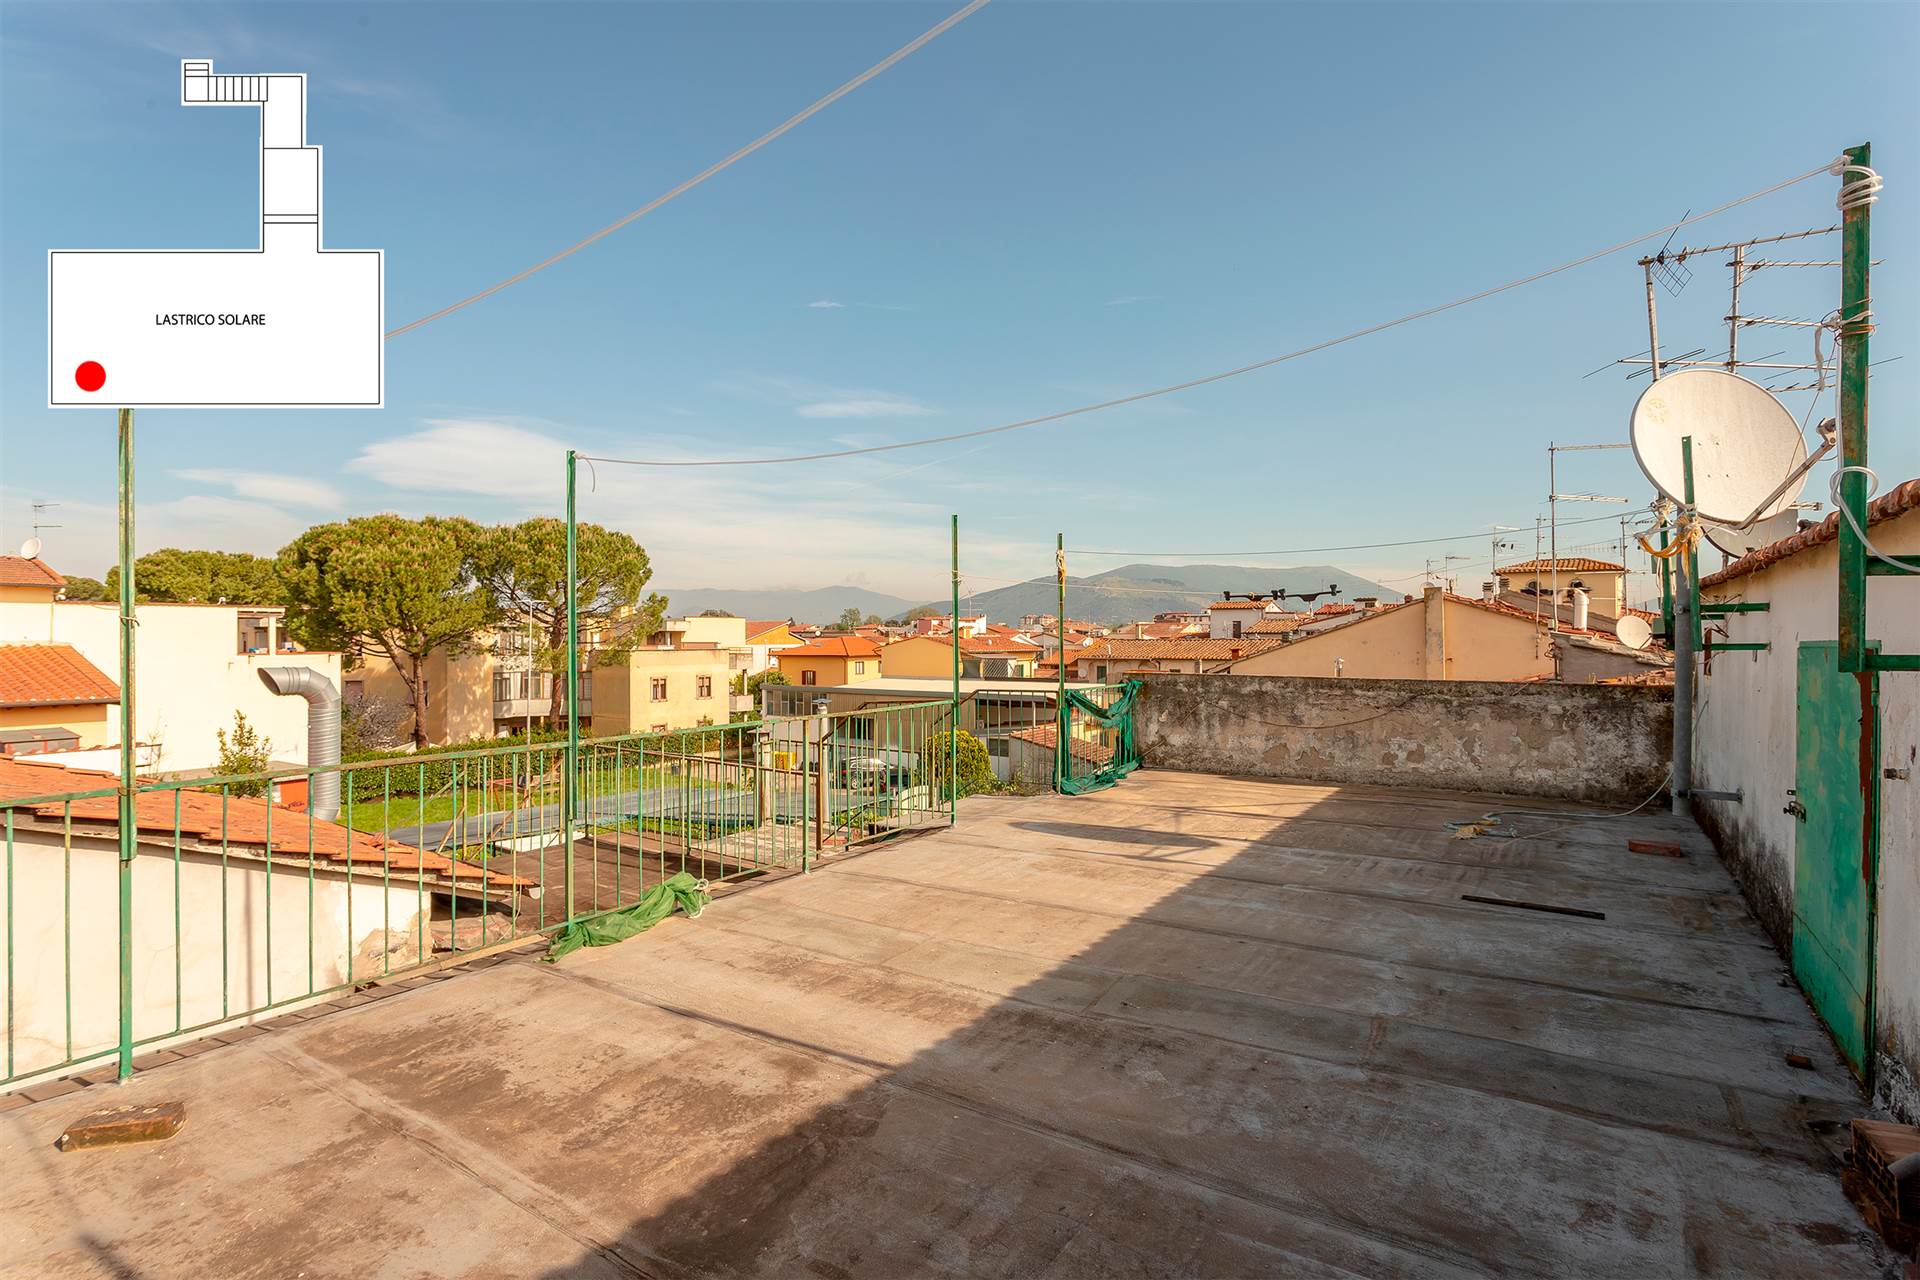 SANTA MARIA, CAMPI BISENZIO, Detached apartment for sale of 162 Sq. mt., Be restored, Heating Individual heating system, Energetic class: G, placed at 1° on 1, composed by: 6 Rooms, Separate kitchen, 